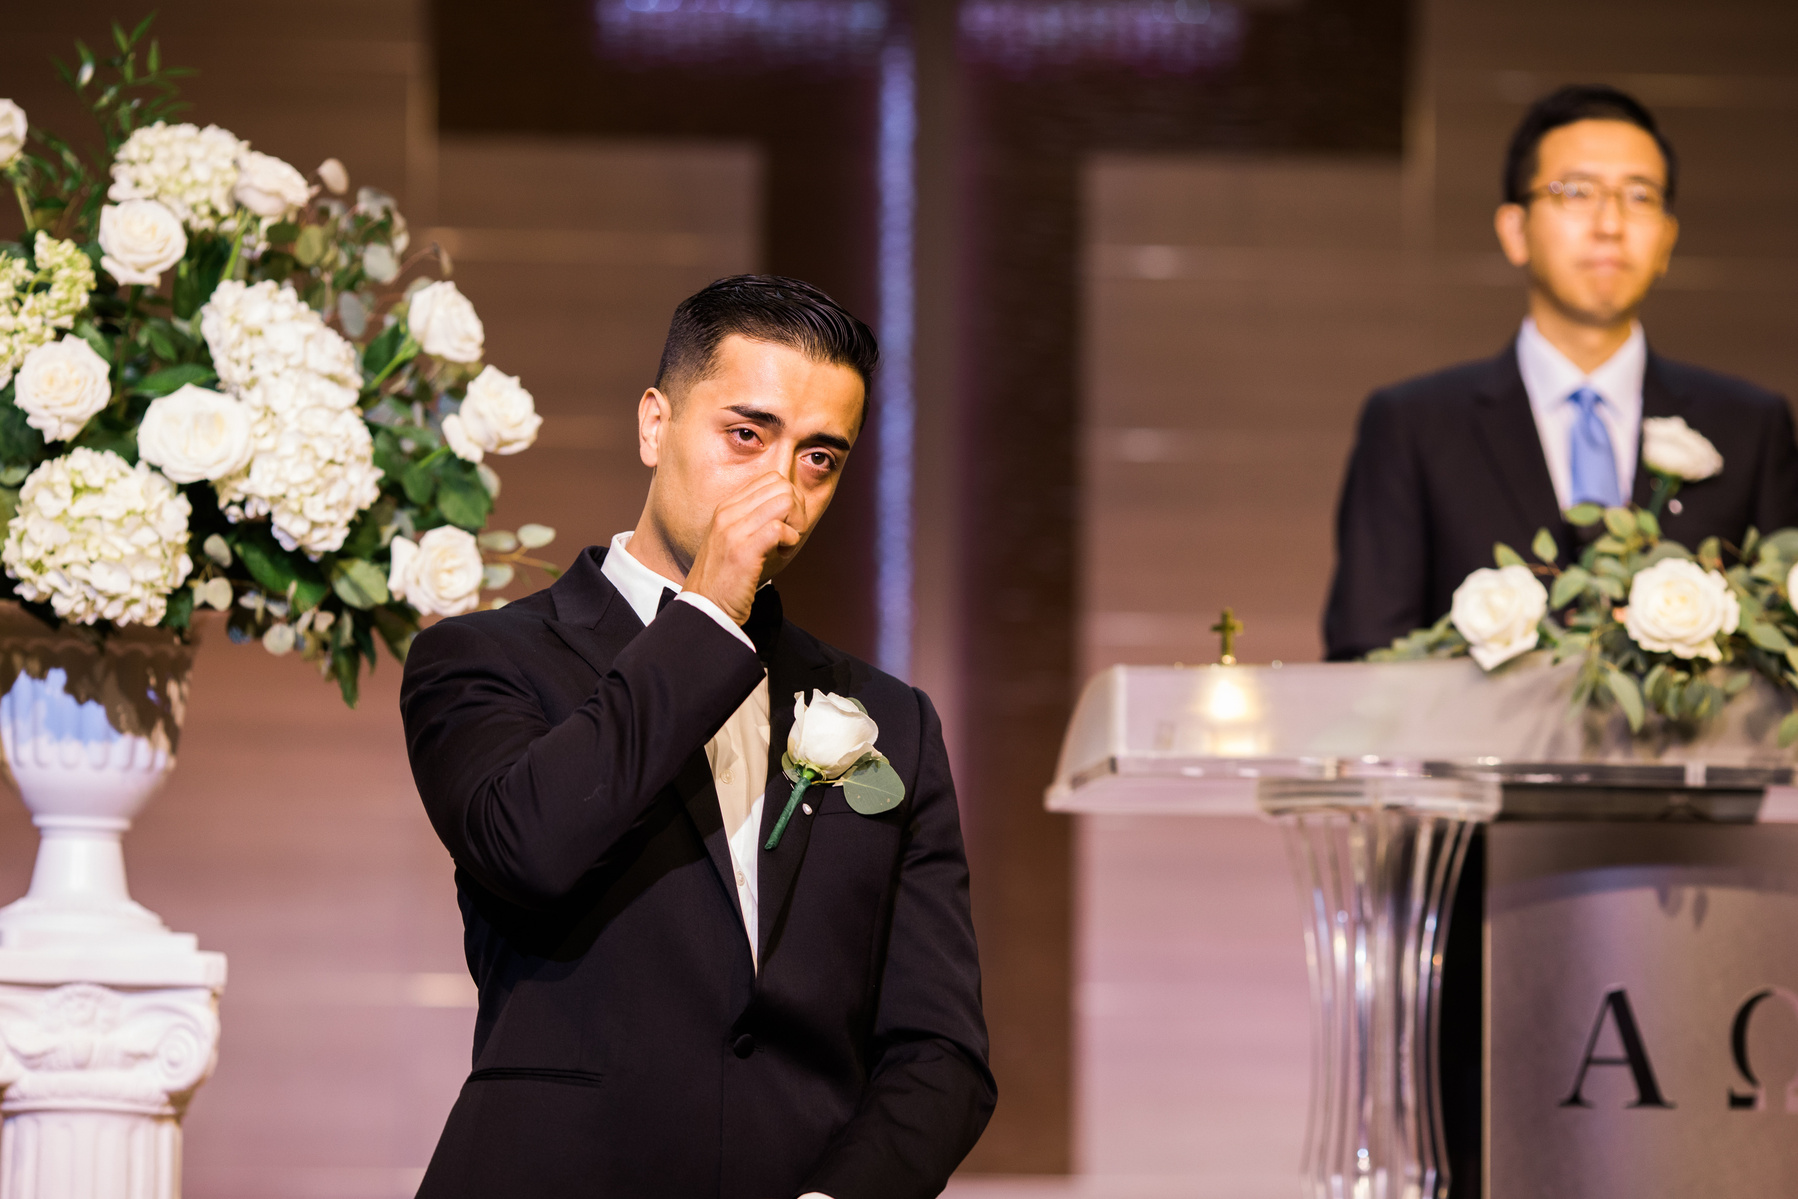 groom gets emotional seeing bride for the first time on their wedding day 